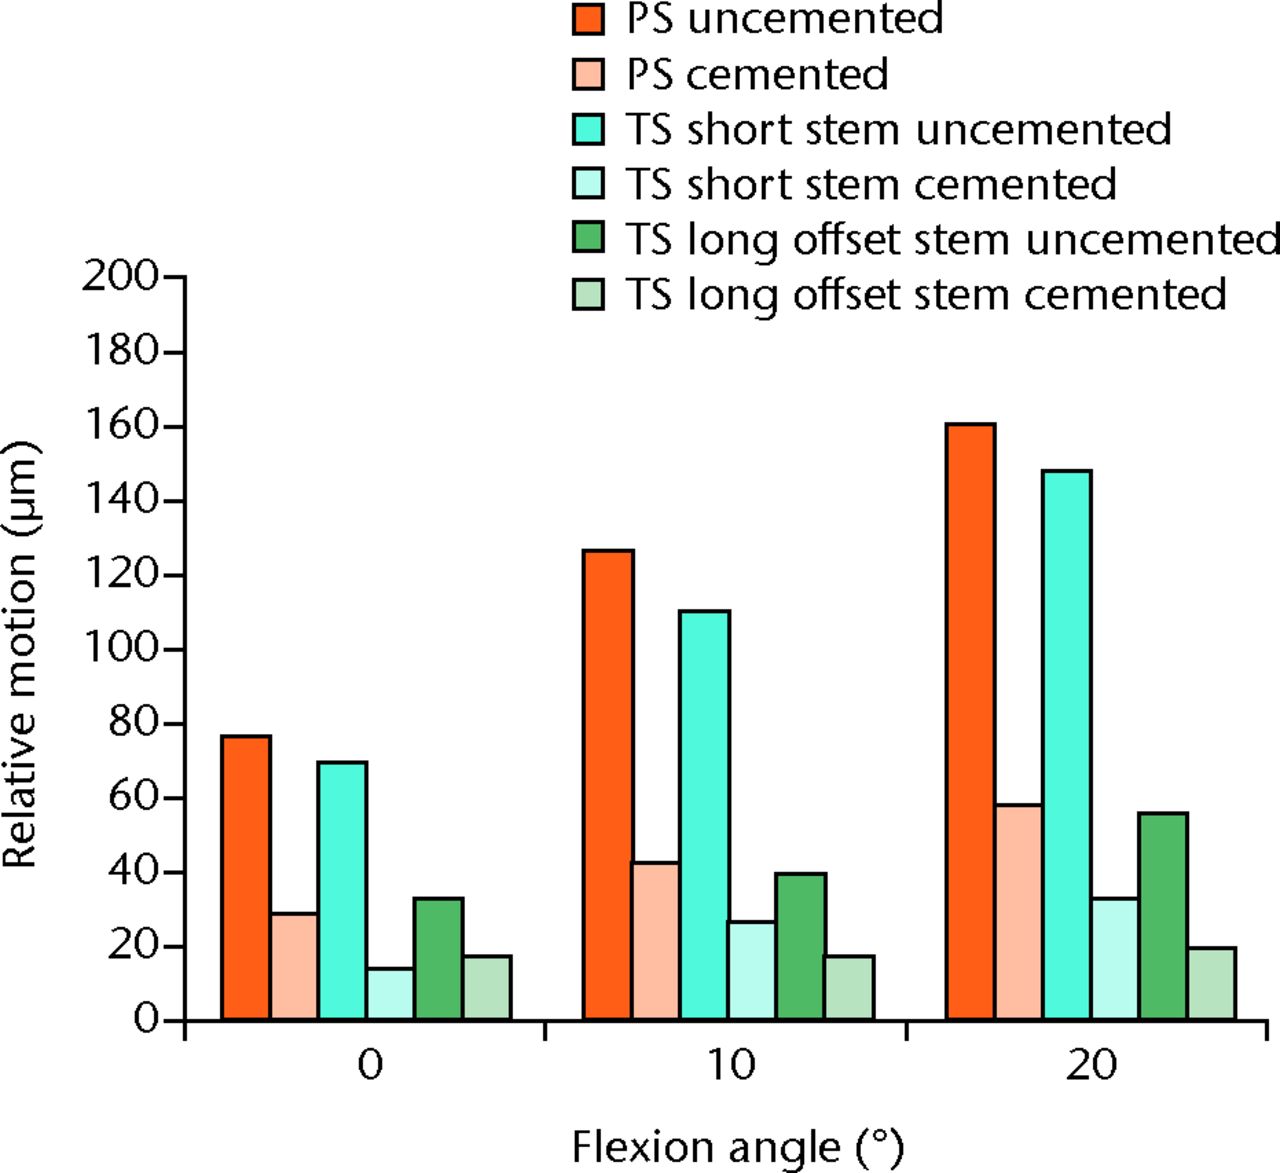 Fig. 5 
          Bar chart showing the overall magnitude
of relative motions for the three flexion angles investigated for
cemented and uncemented implants (PS, posterior-stabilised; TS,
total-stabilised)..
        